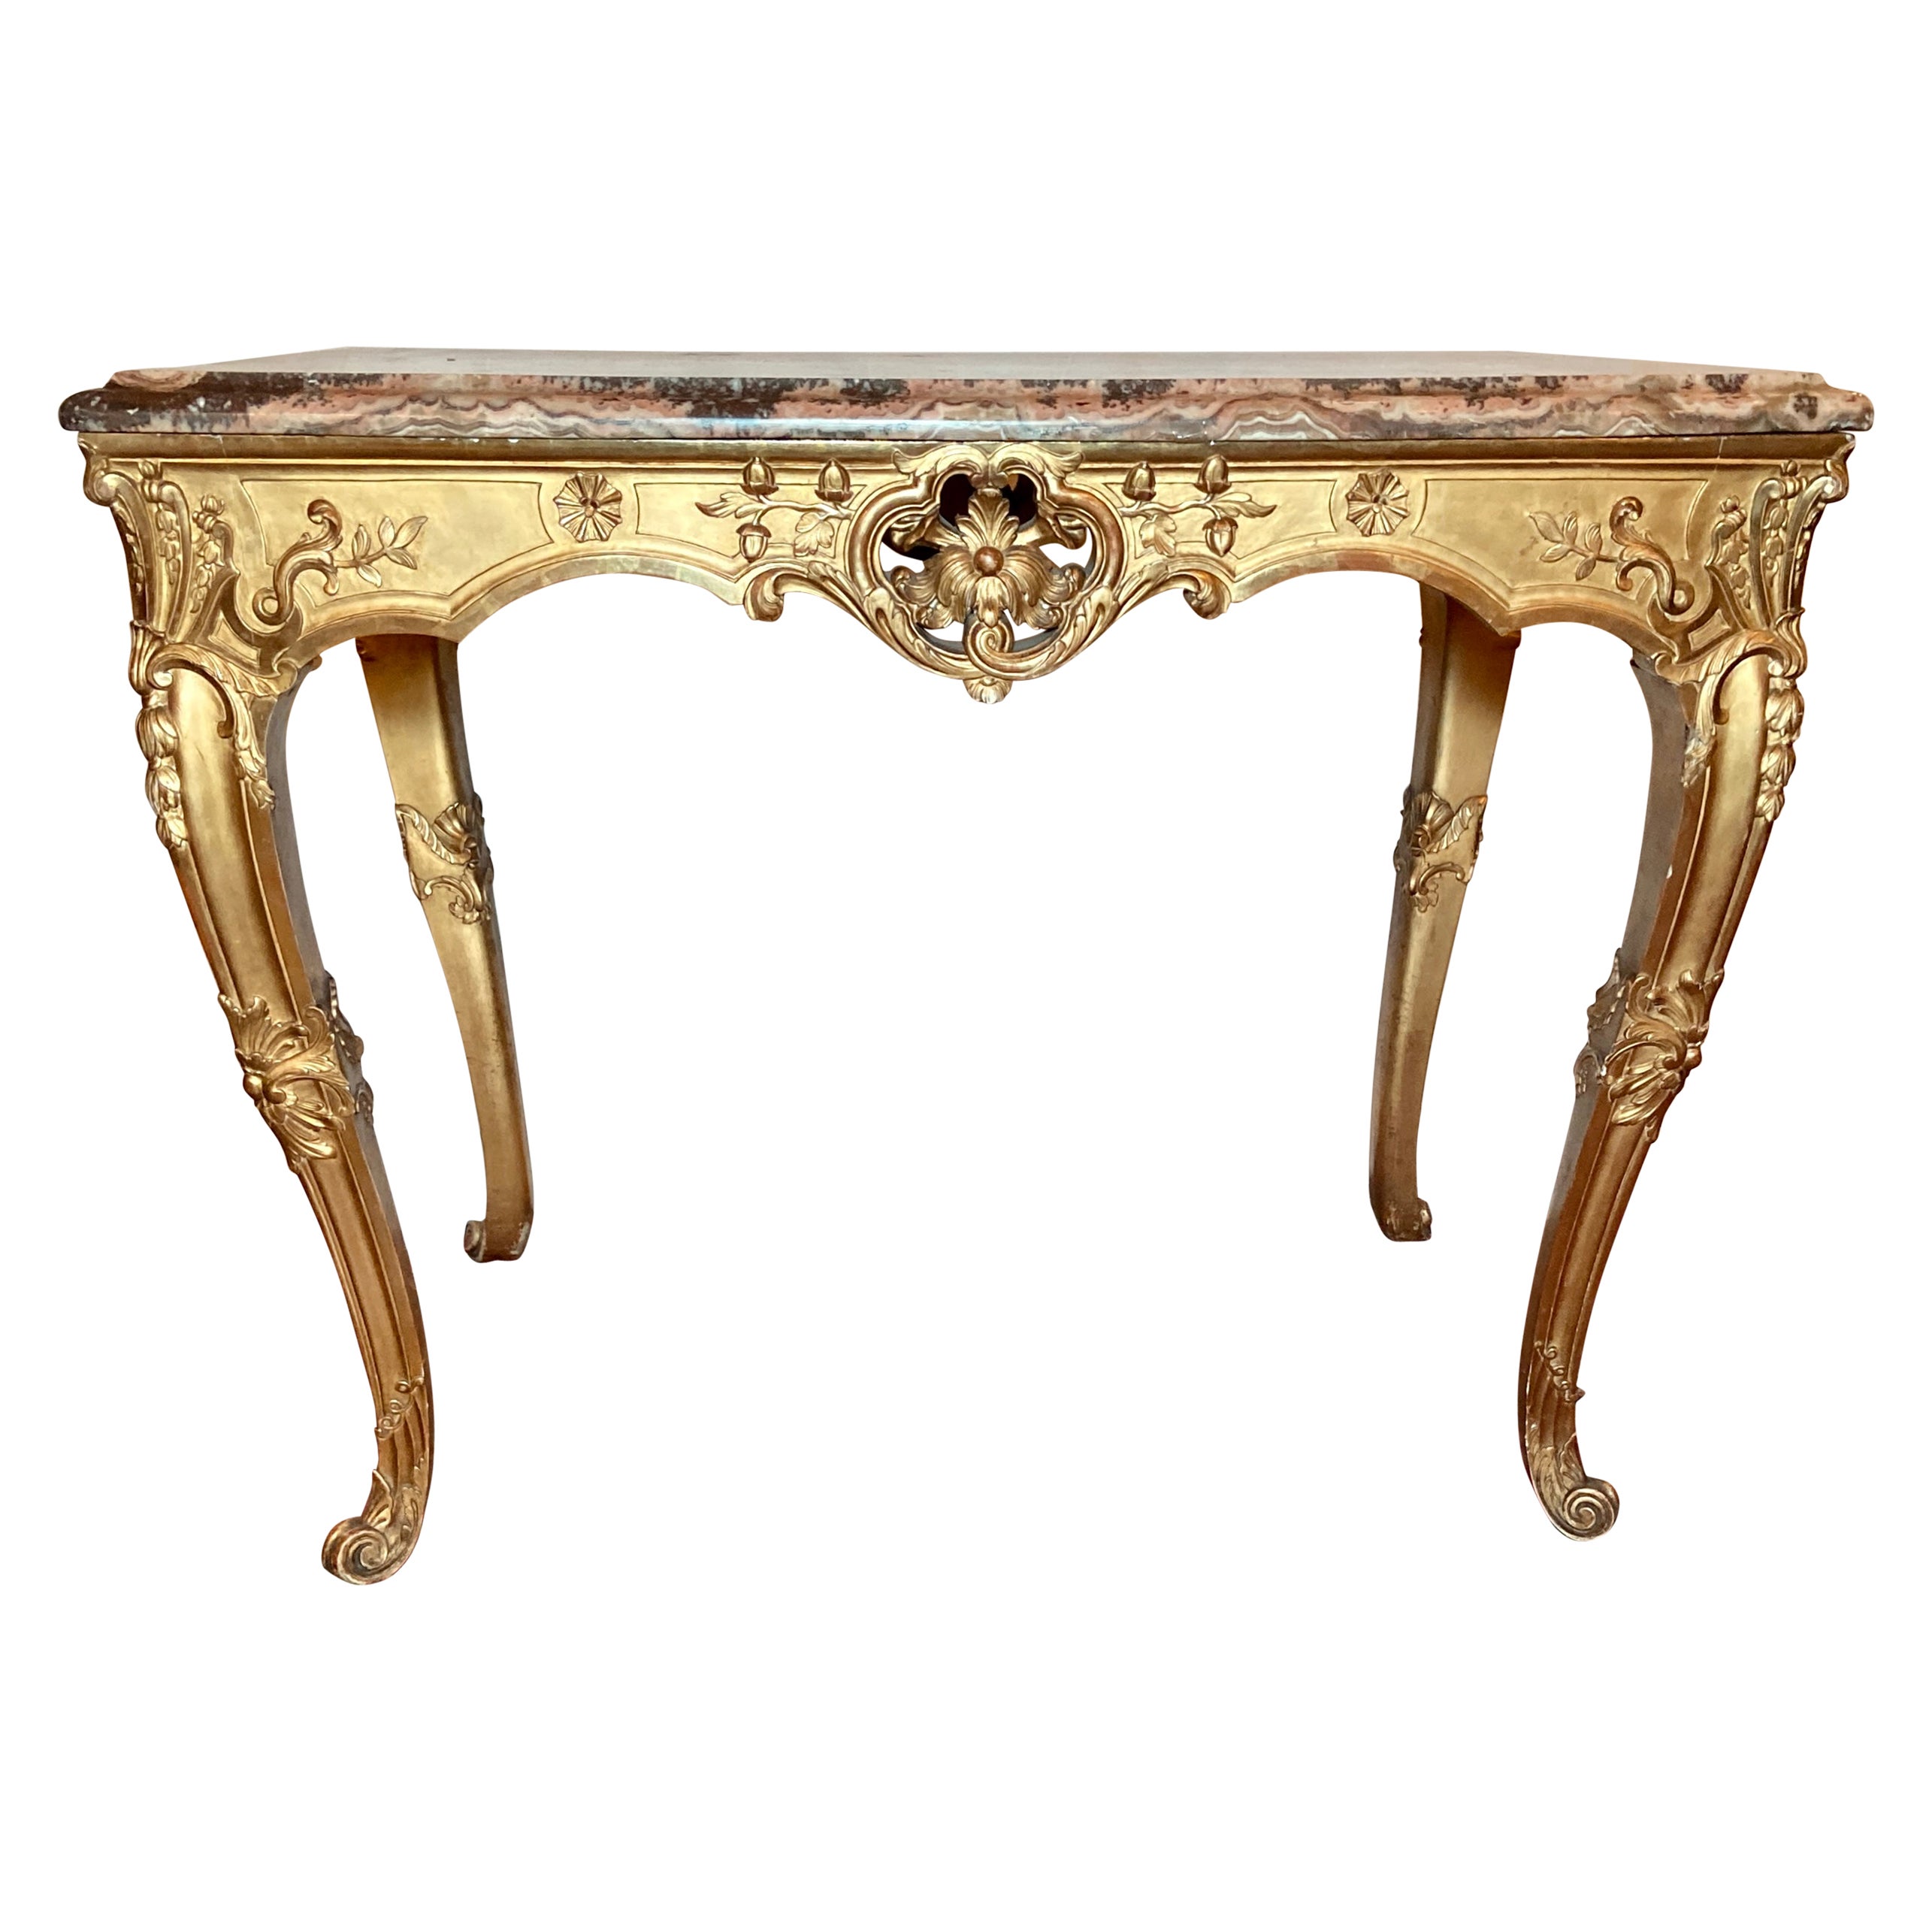 Antique French Régence Gold-Leaf Center Table with Marble Top, Circa 1840-1850 For Sale